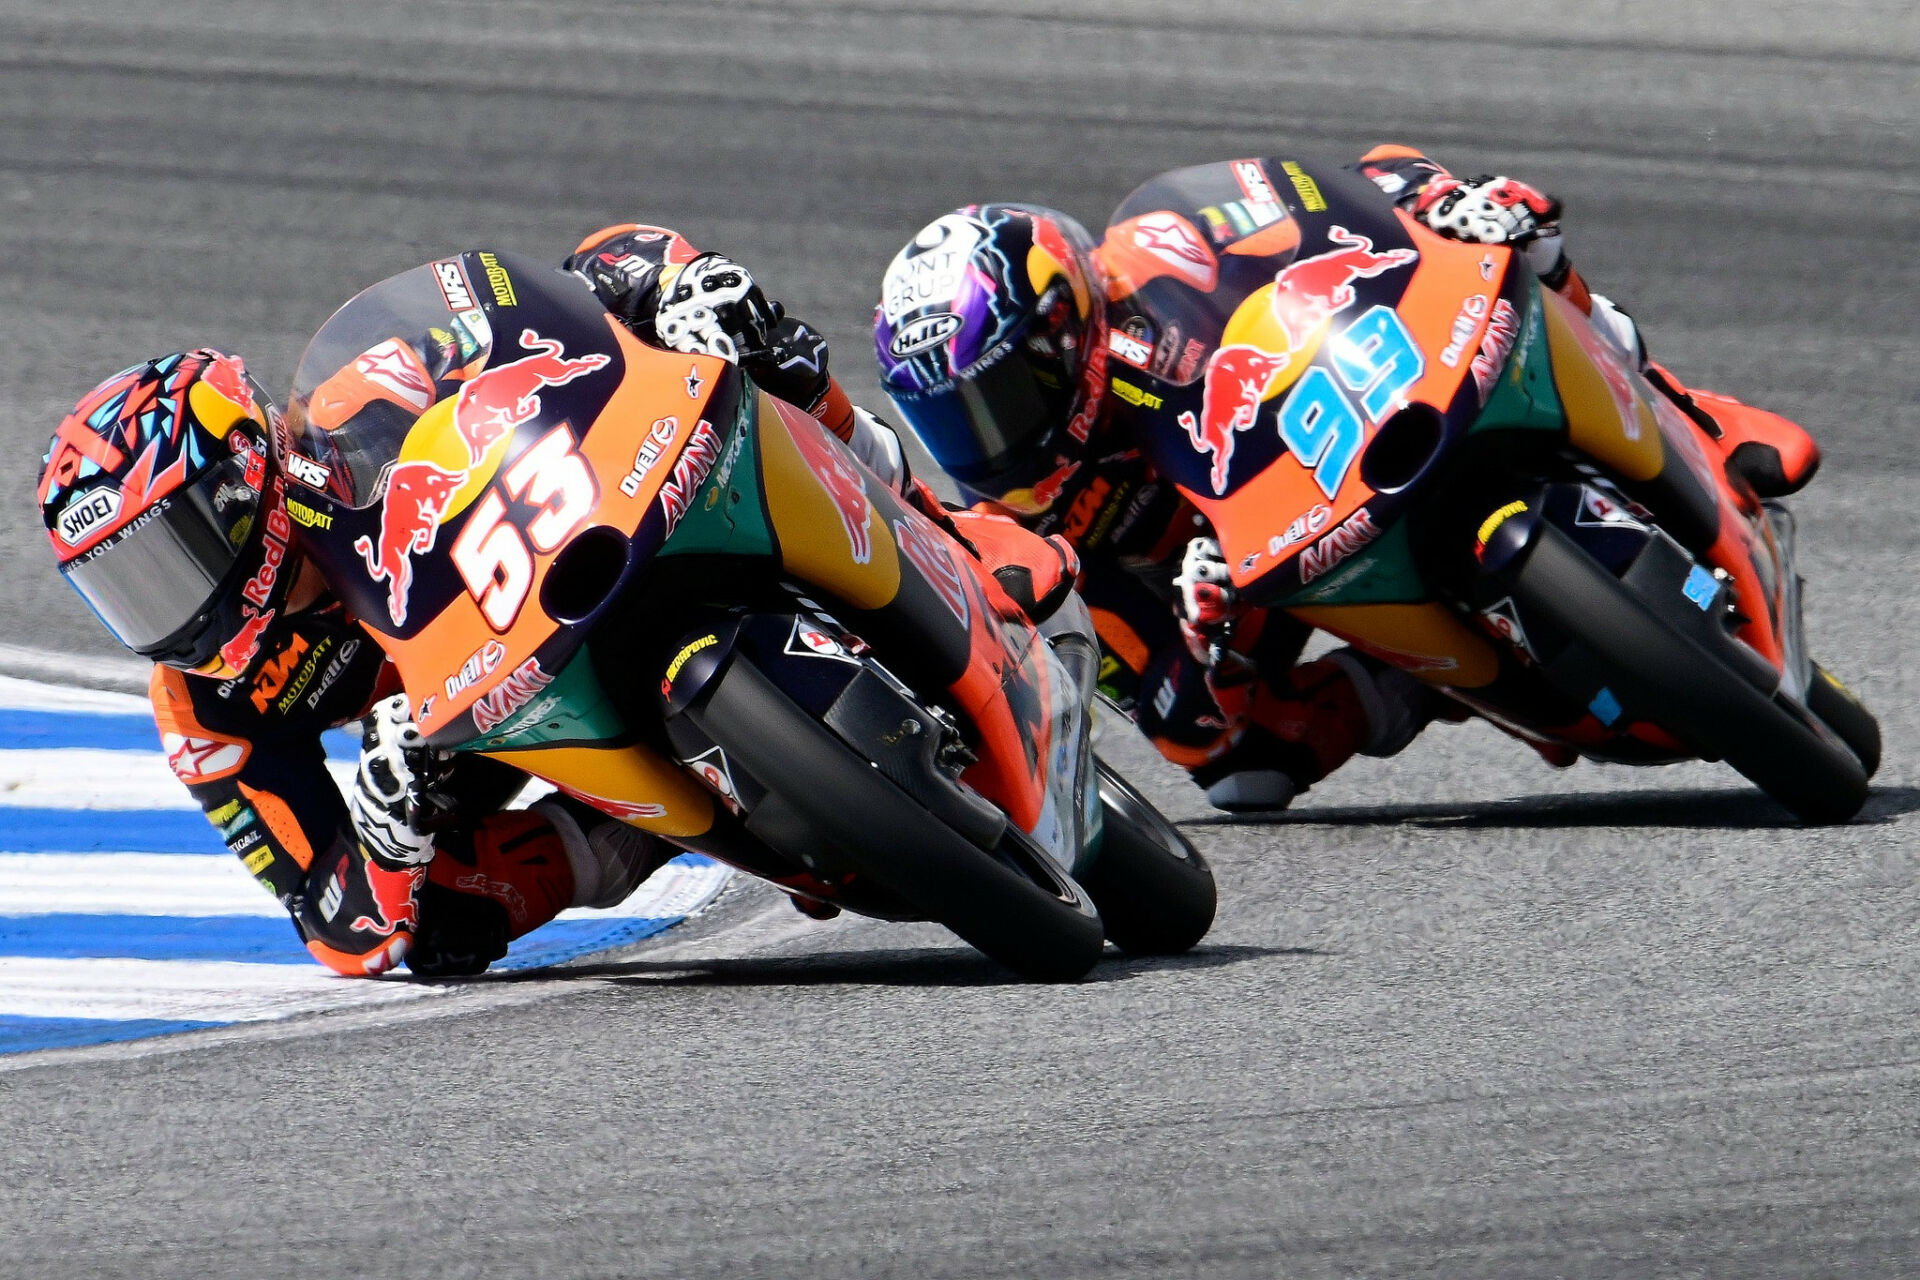 Deniz Oncu (53) and his Red Bull KTM Ajo teammate Jose Rueda (99) in action in Thailand. Photo courtesy Red Bull KTM Ajo.